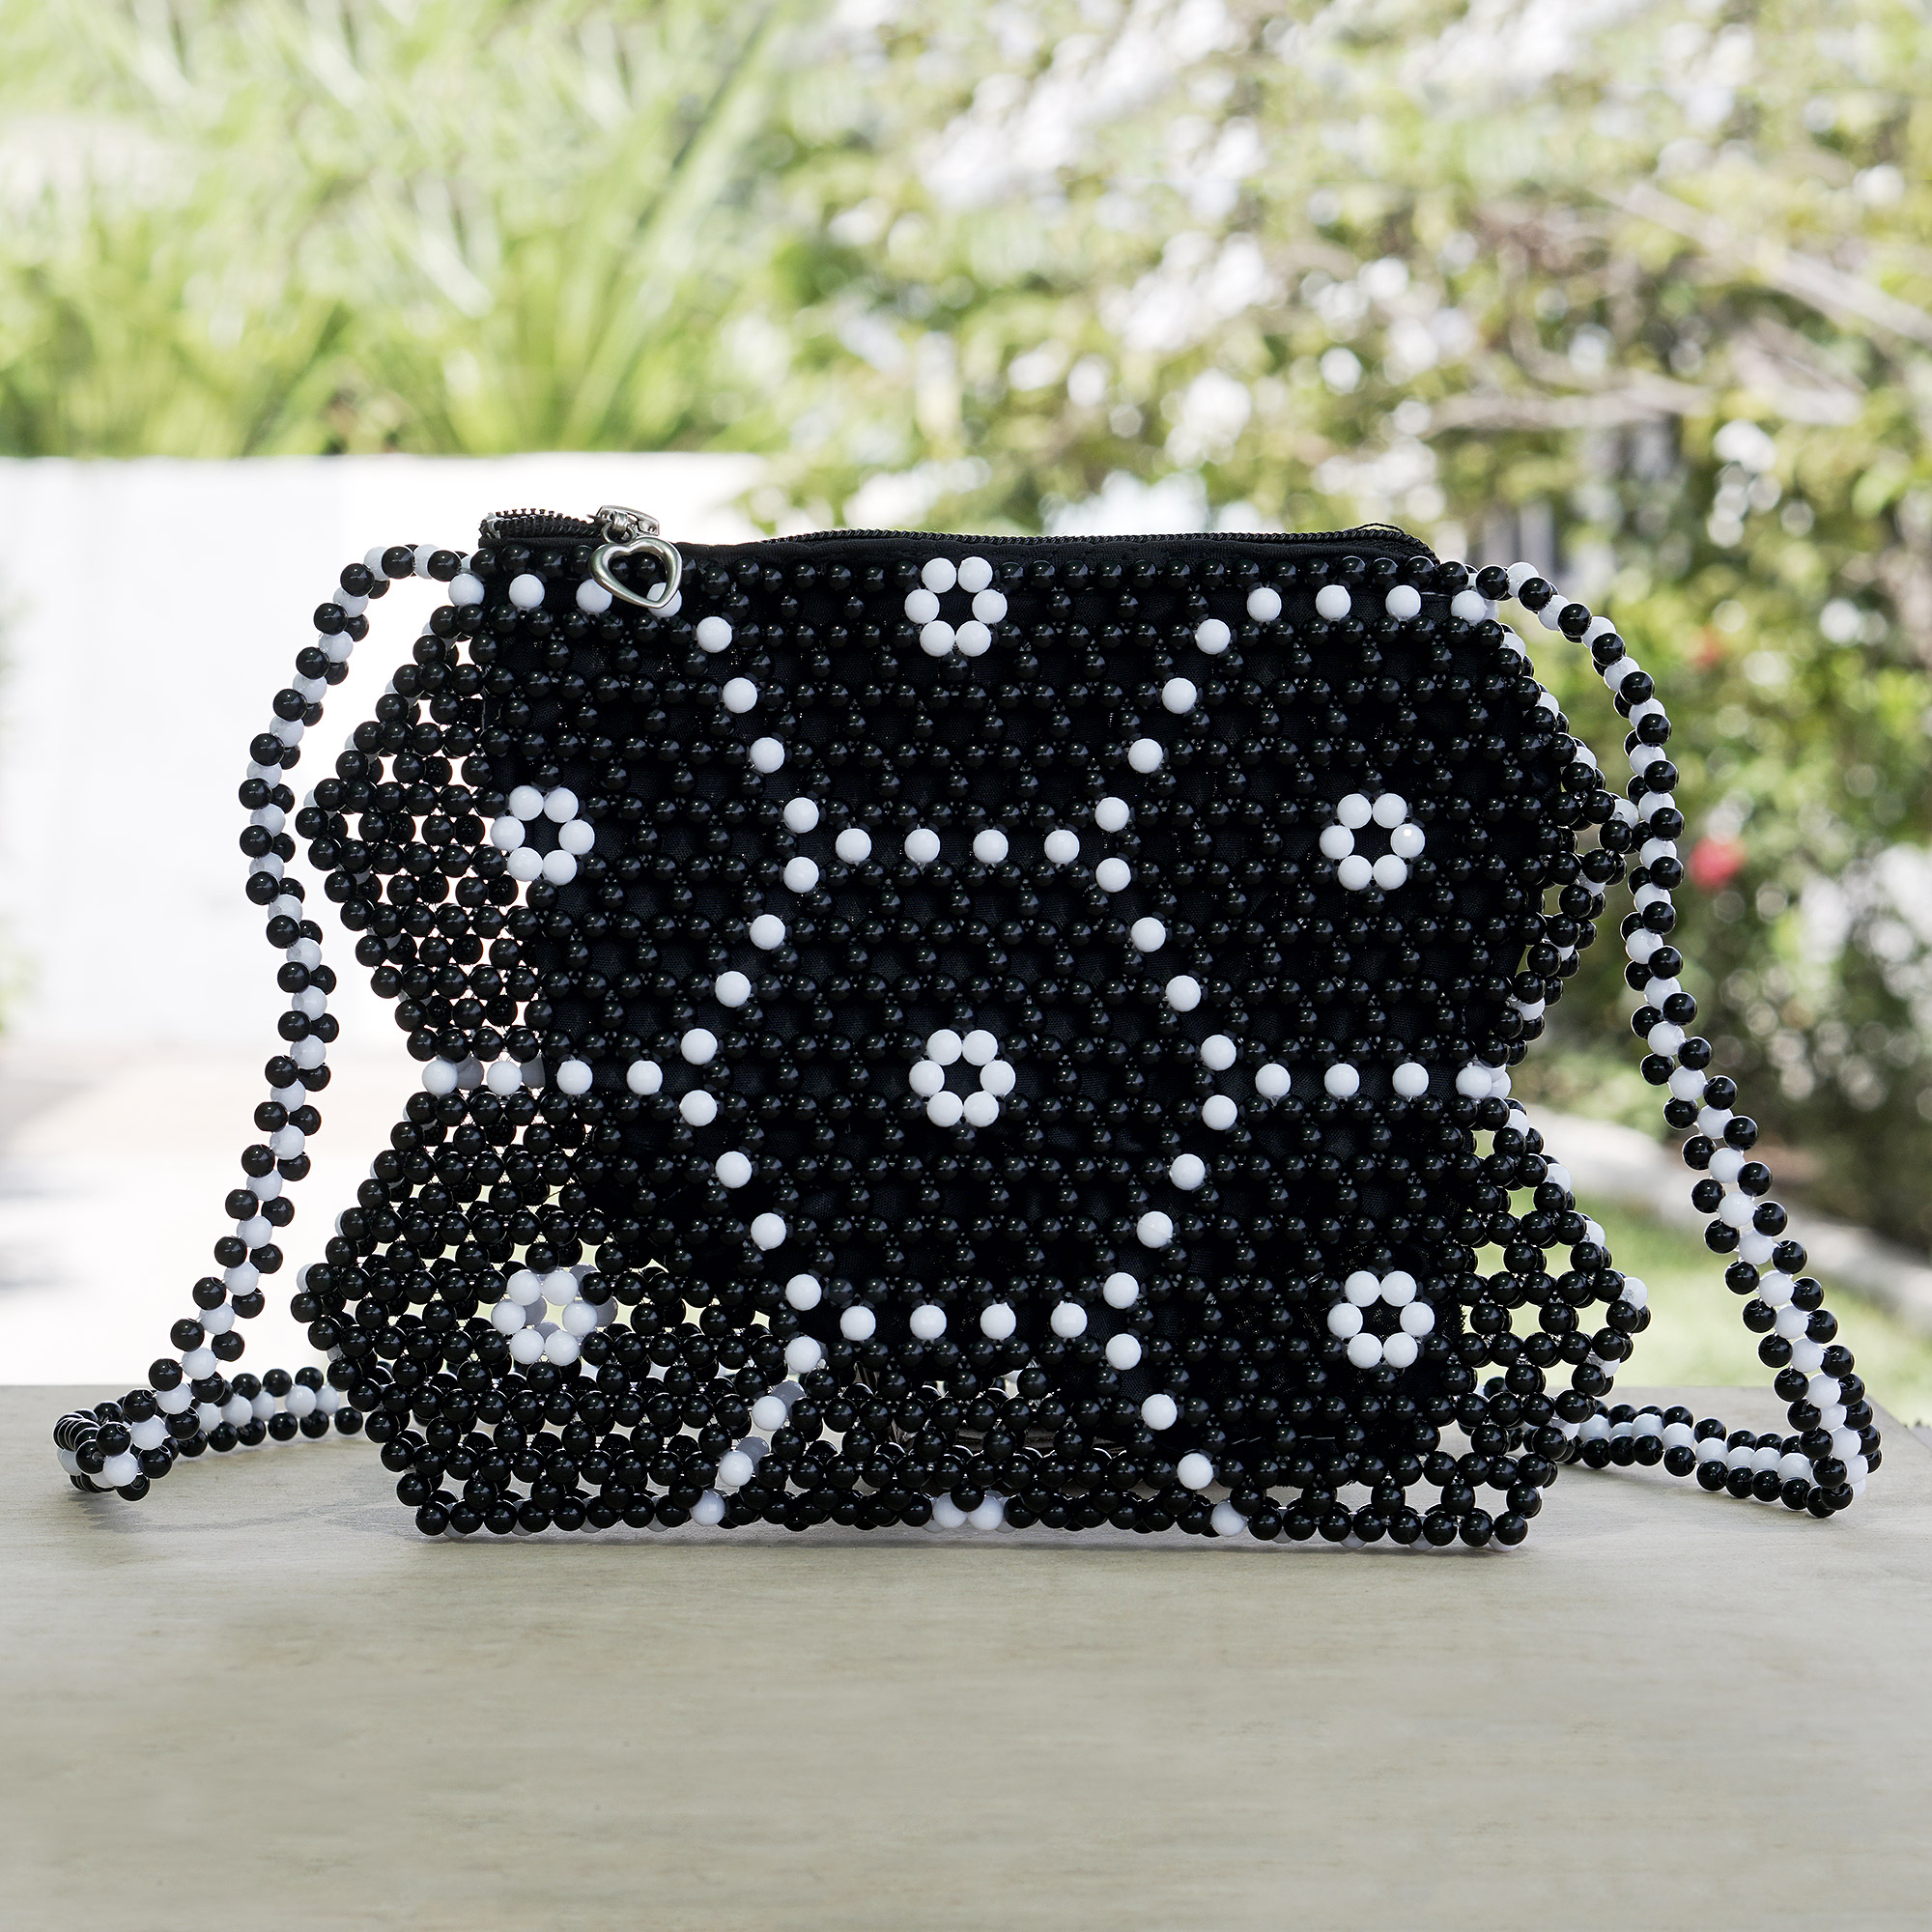 Eco-friendly, Colorful Clutch From Recycled Materials